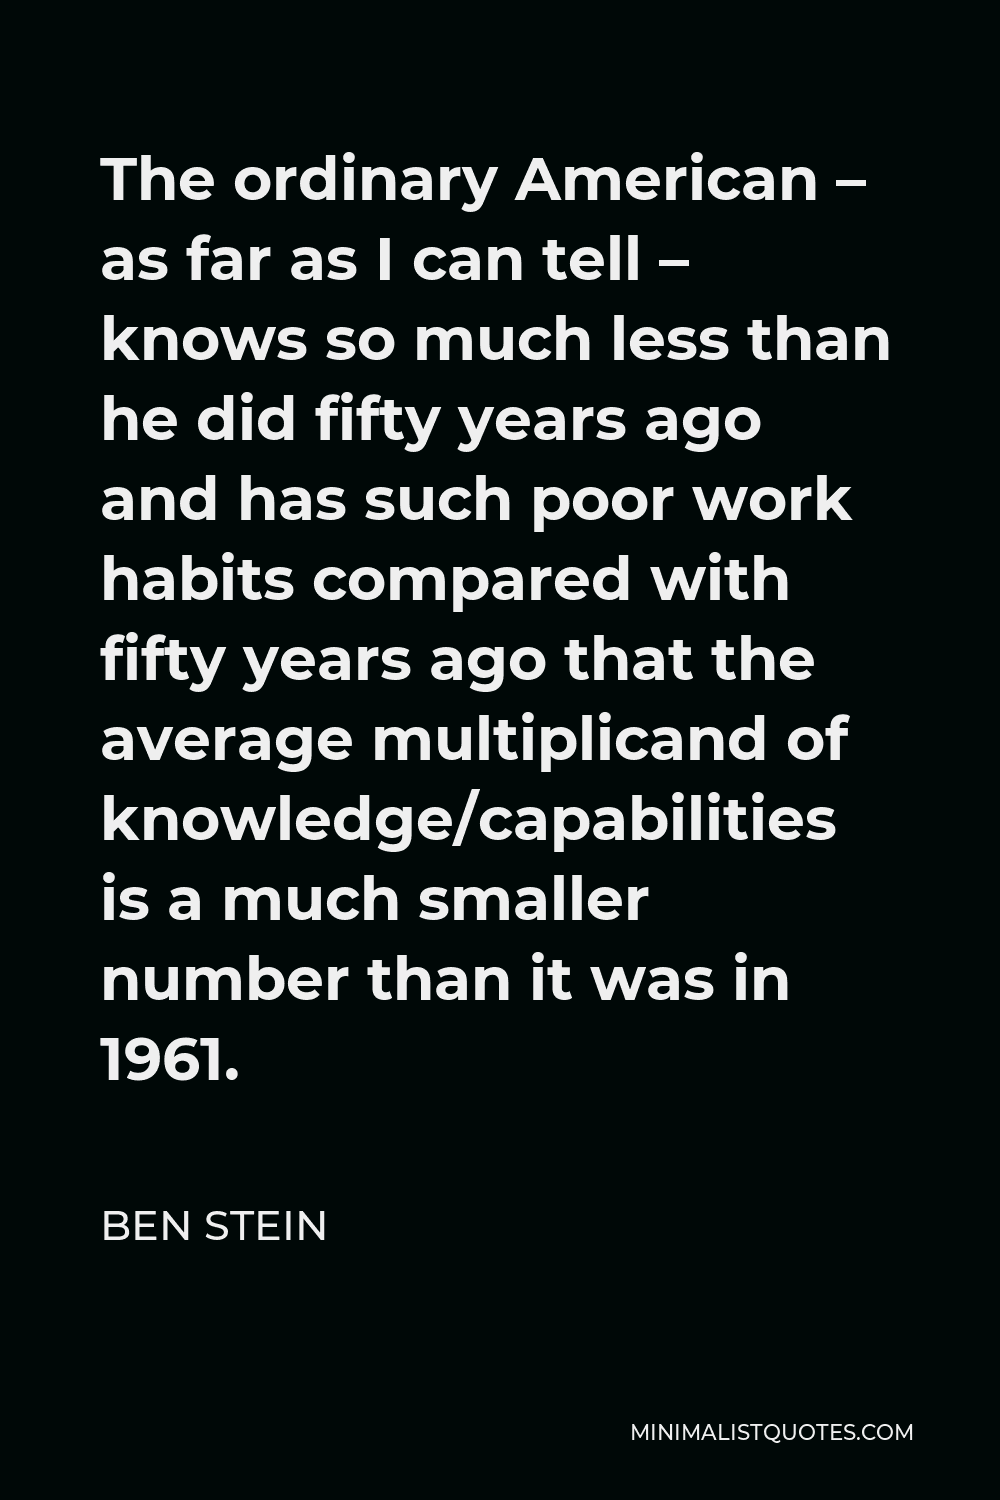 Ben Stein Quote - The ordinary American – as far as I can tell – knows so much less than he did fifty years ago and has such poor work habits compared with fifty years ago that the average multiplicand of knowledge/capabilities is a much smaller number than it was in 1961.